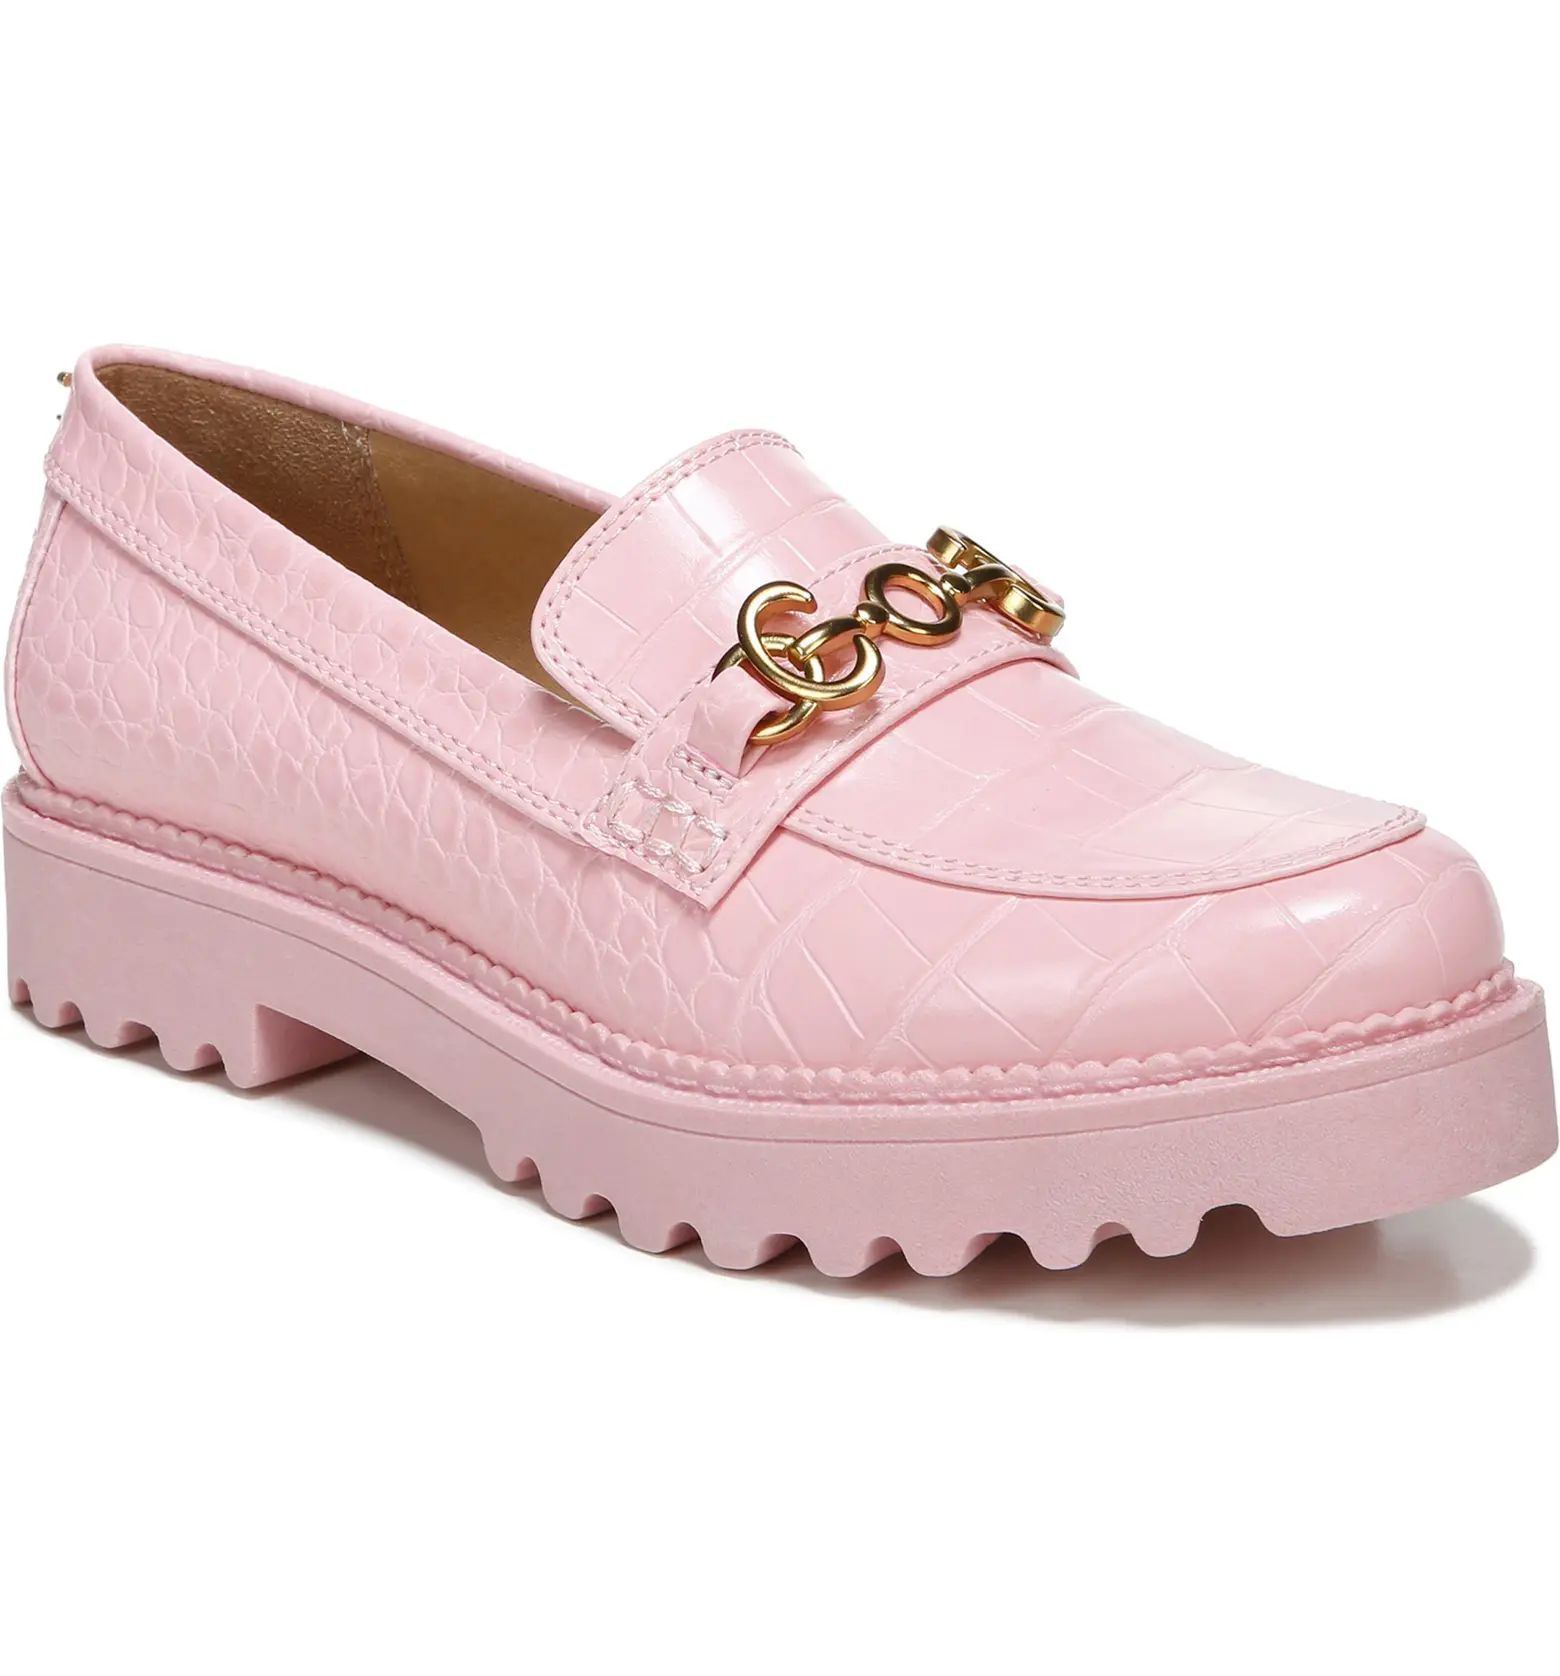 Circus by Sam Edelman Deana Loafer | Nordstrom Rack